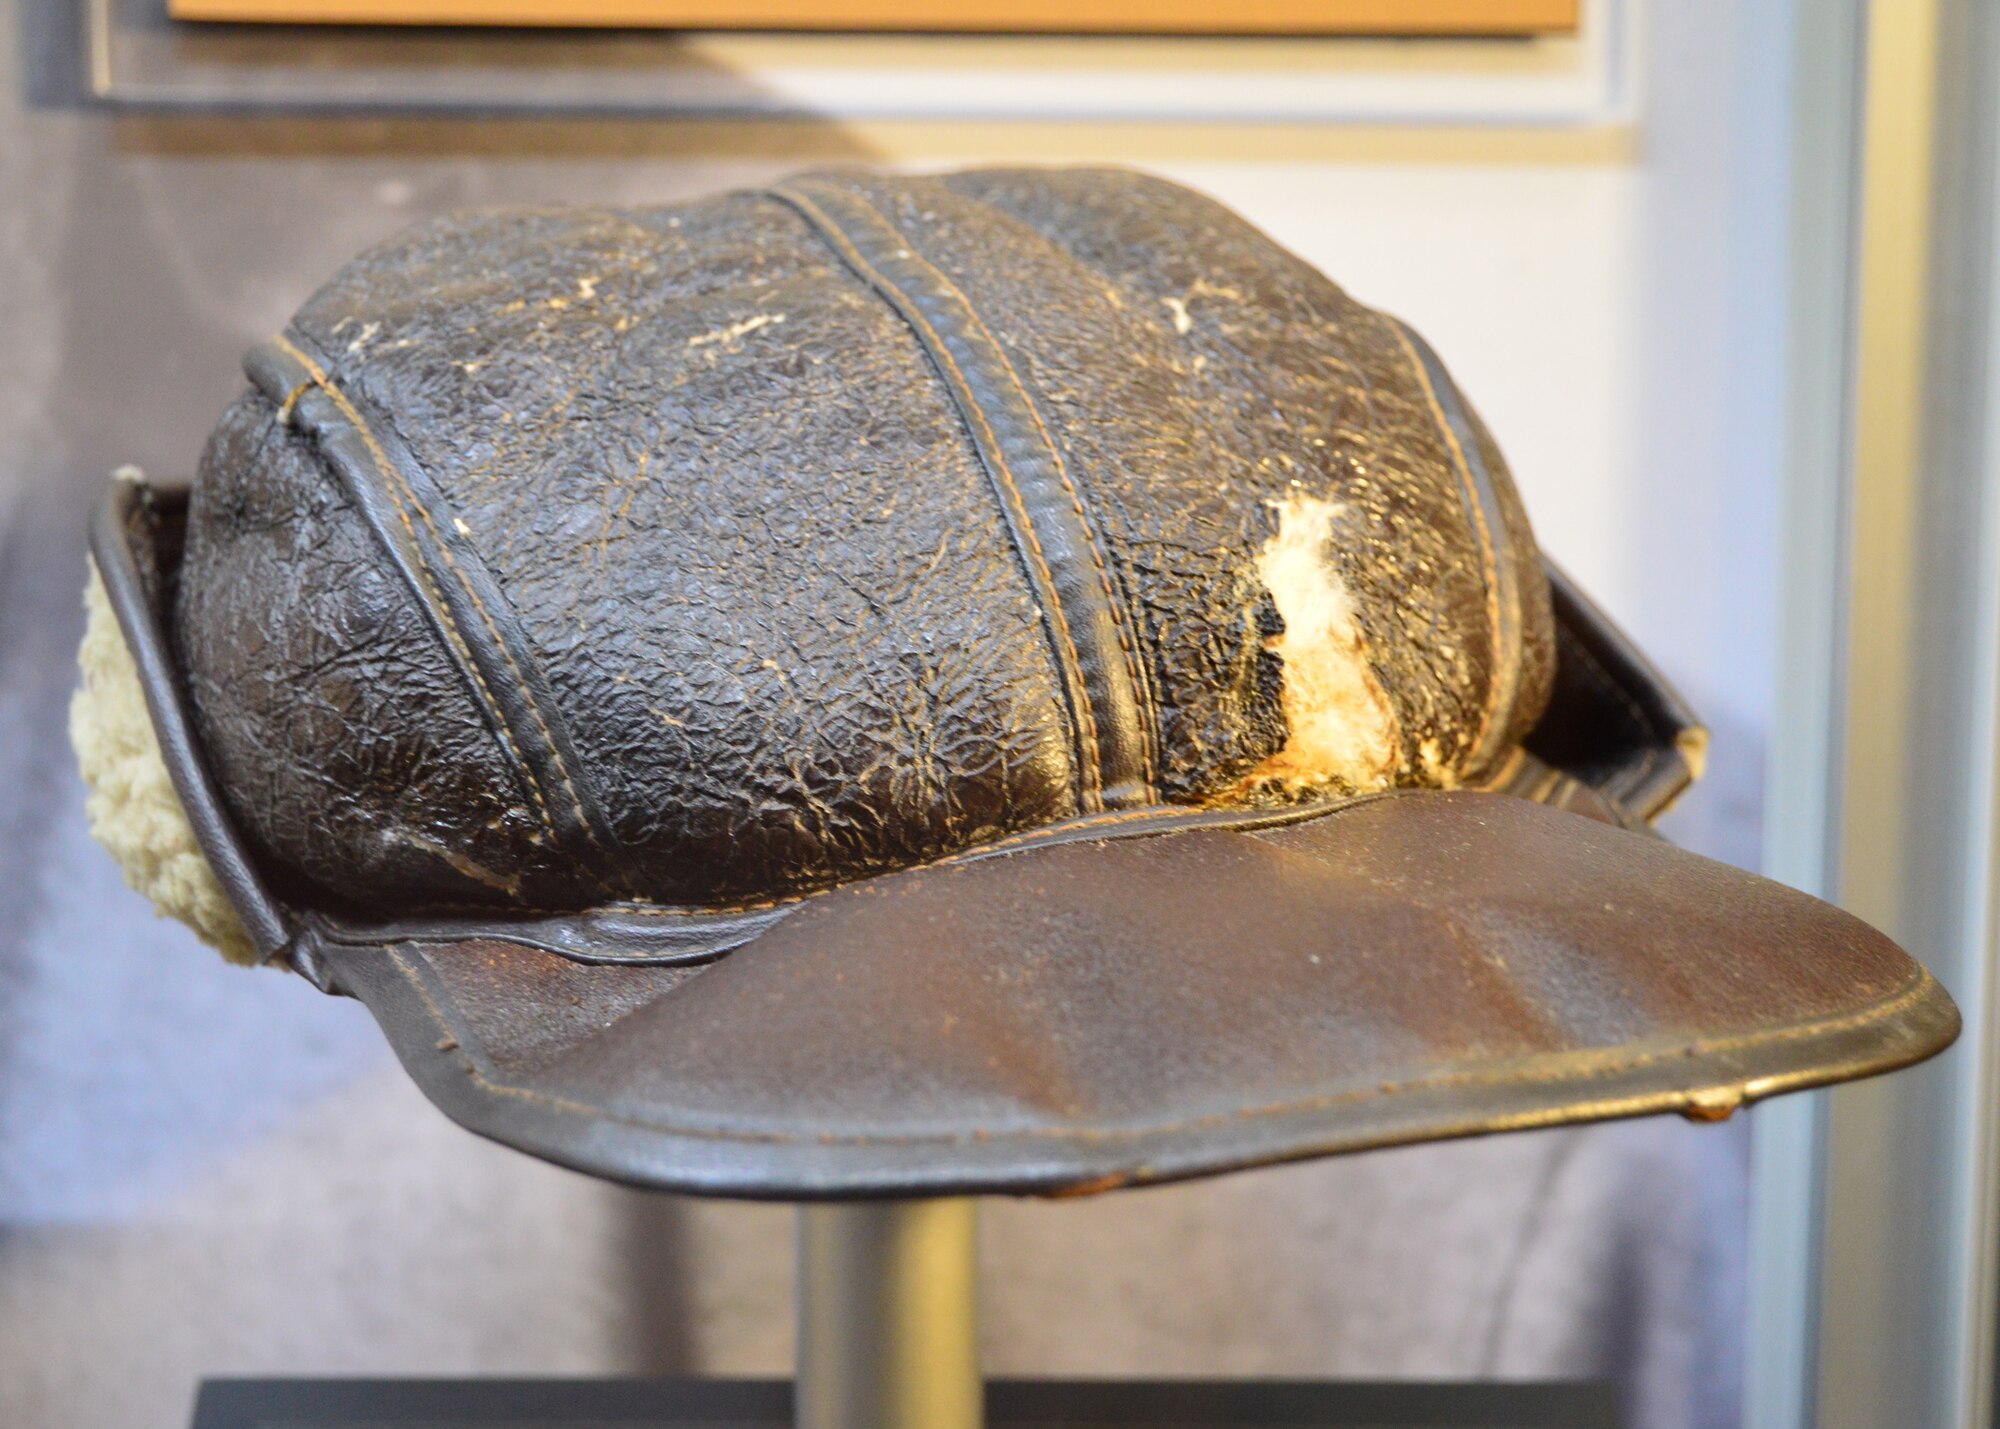 DAYTON, Ohio -- Lt. Hathcock's leather cap on display in the WWII Gallery at the National Museum of the U.S. Air Force. Captured in Italy during the summer of 1944, Lt. (later Maj.) Lloyd "Scotty" Hathcock spent the rest of the war in Stalag Luft III and Stalag VII-A prison camps. After the war, Hathcock stayed in the service and helped to desegregate the U.S. Air Force. (U.S. Air Force photo)
